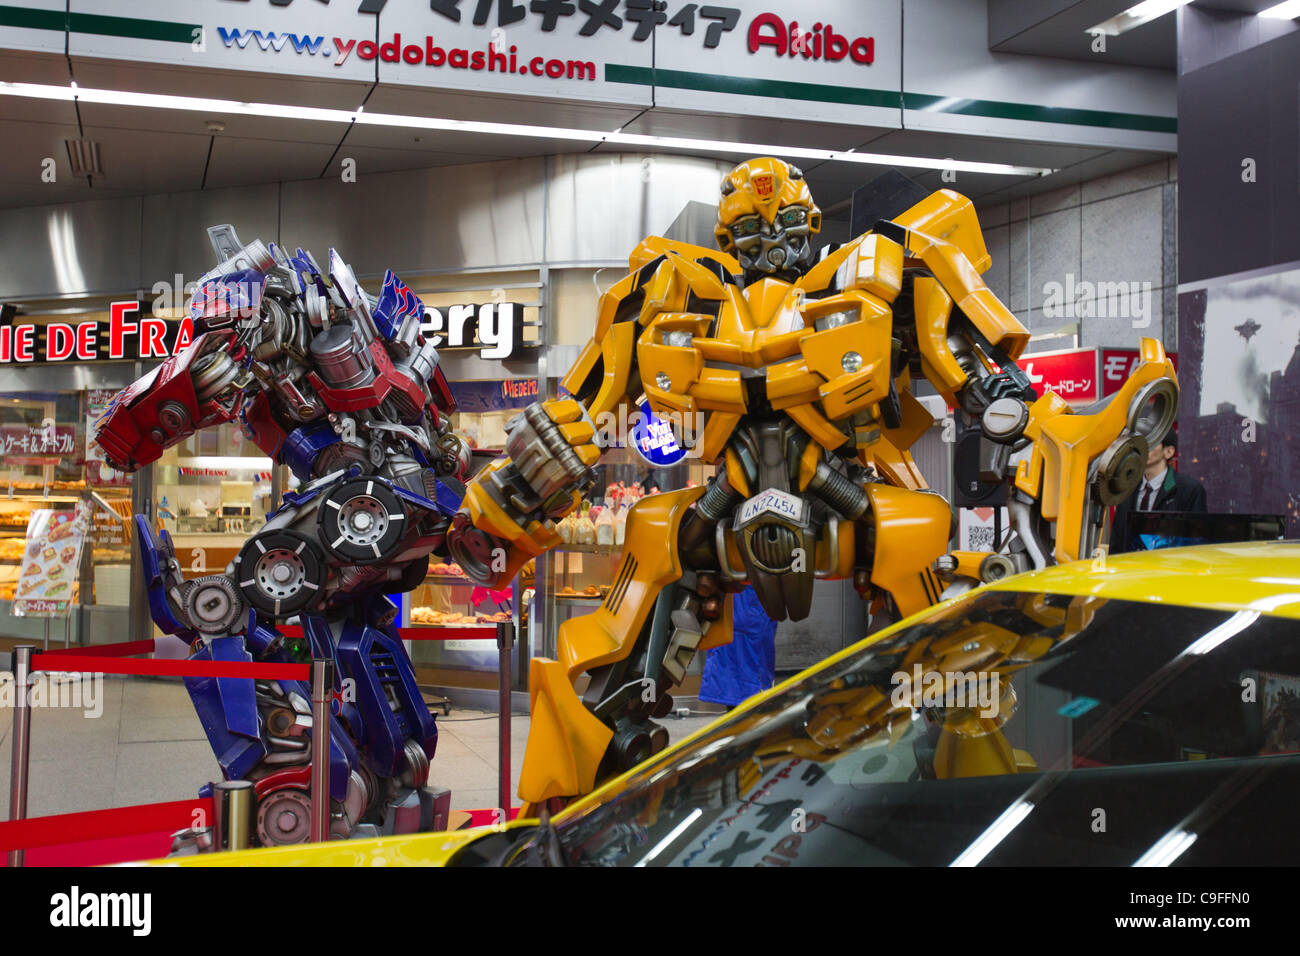 Dec 15, 2011, Tokyo, Japan - Large scale figures of Optimus Prime (left)  and Bumblebee (right) from the movie, "Transformers Dark Side of the Moon"  are displayed at a electronics store in